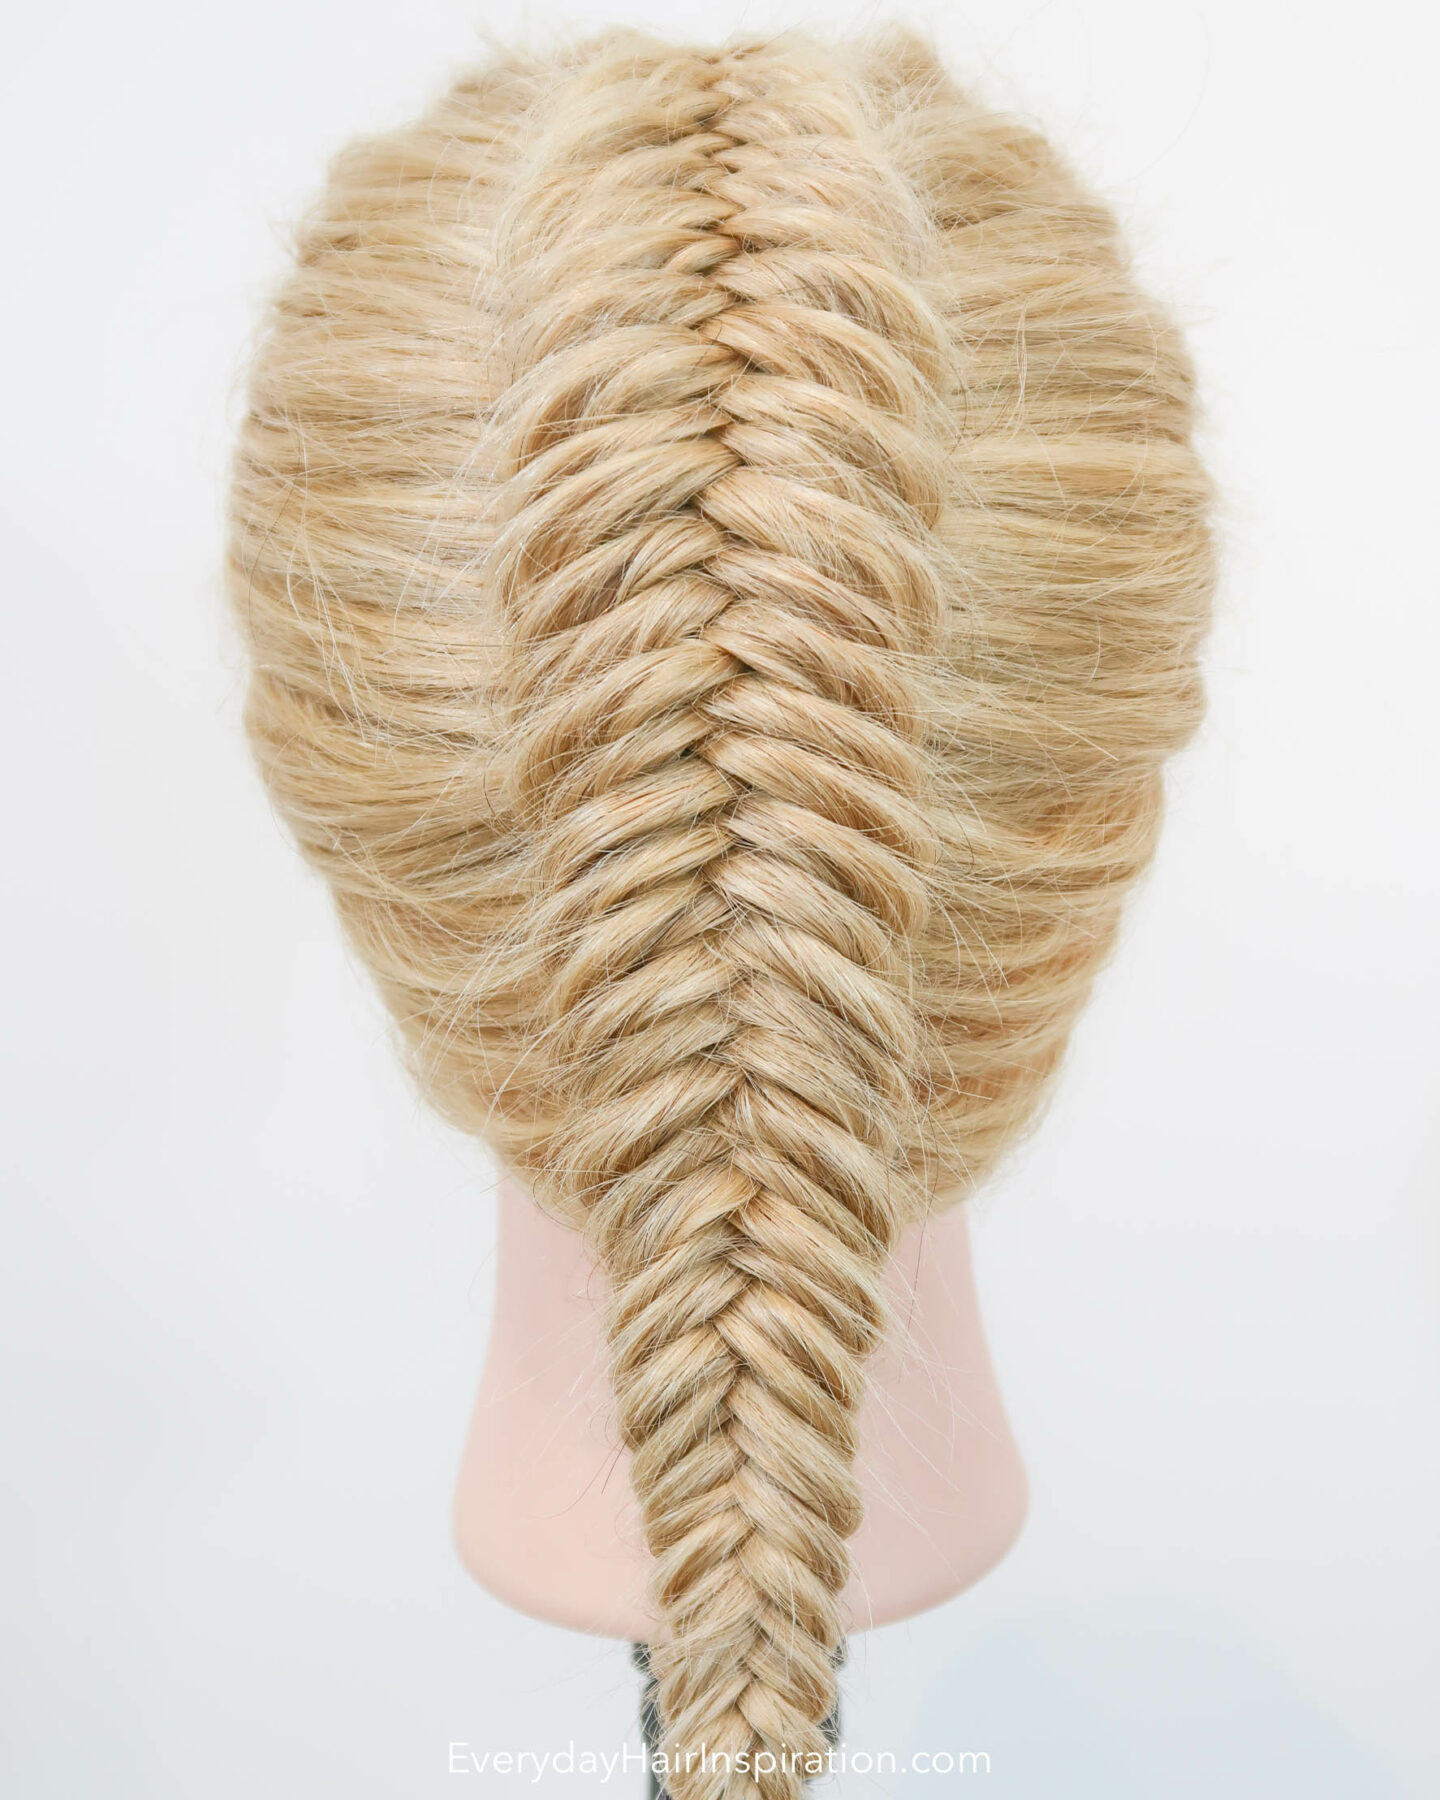 Blonde hairdresser doll seen from the back, with a single dutch fishtail braid in the hair